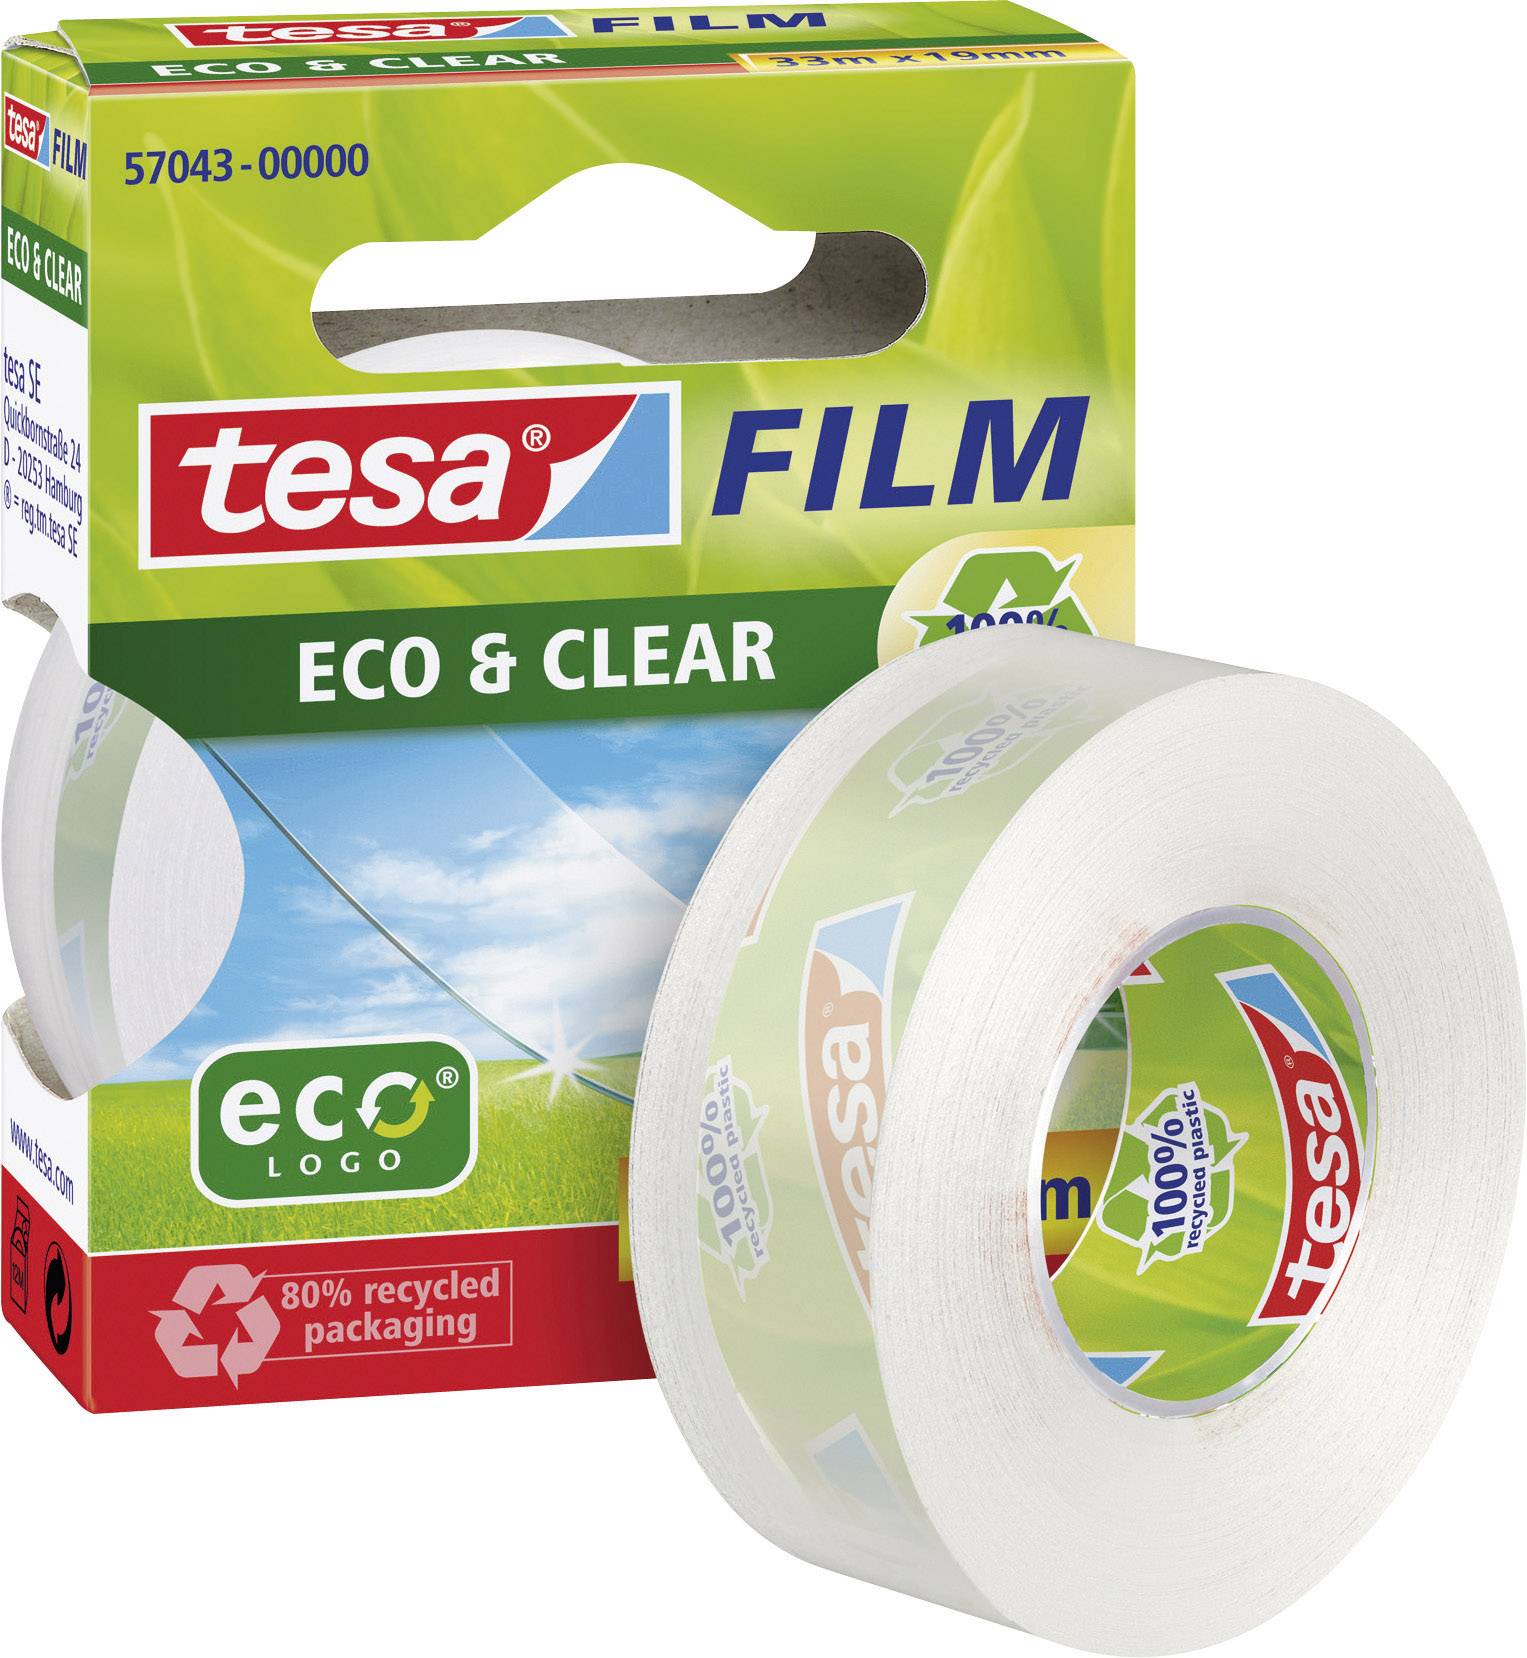 Eco & Clear Double Sided Tape 57035-00000-00